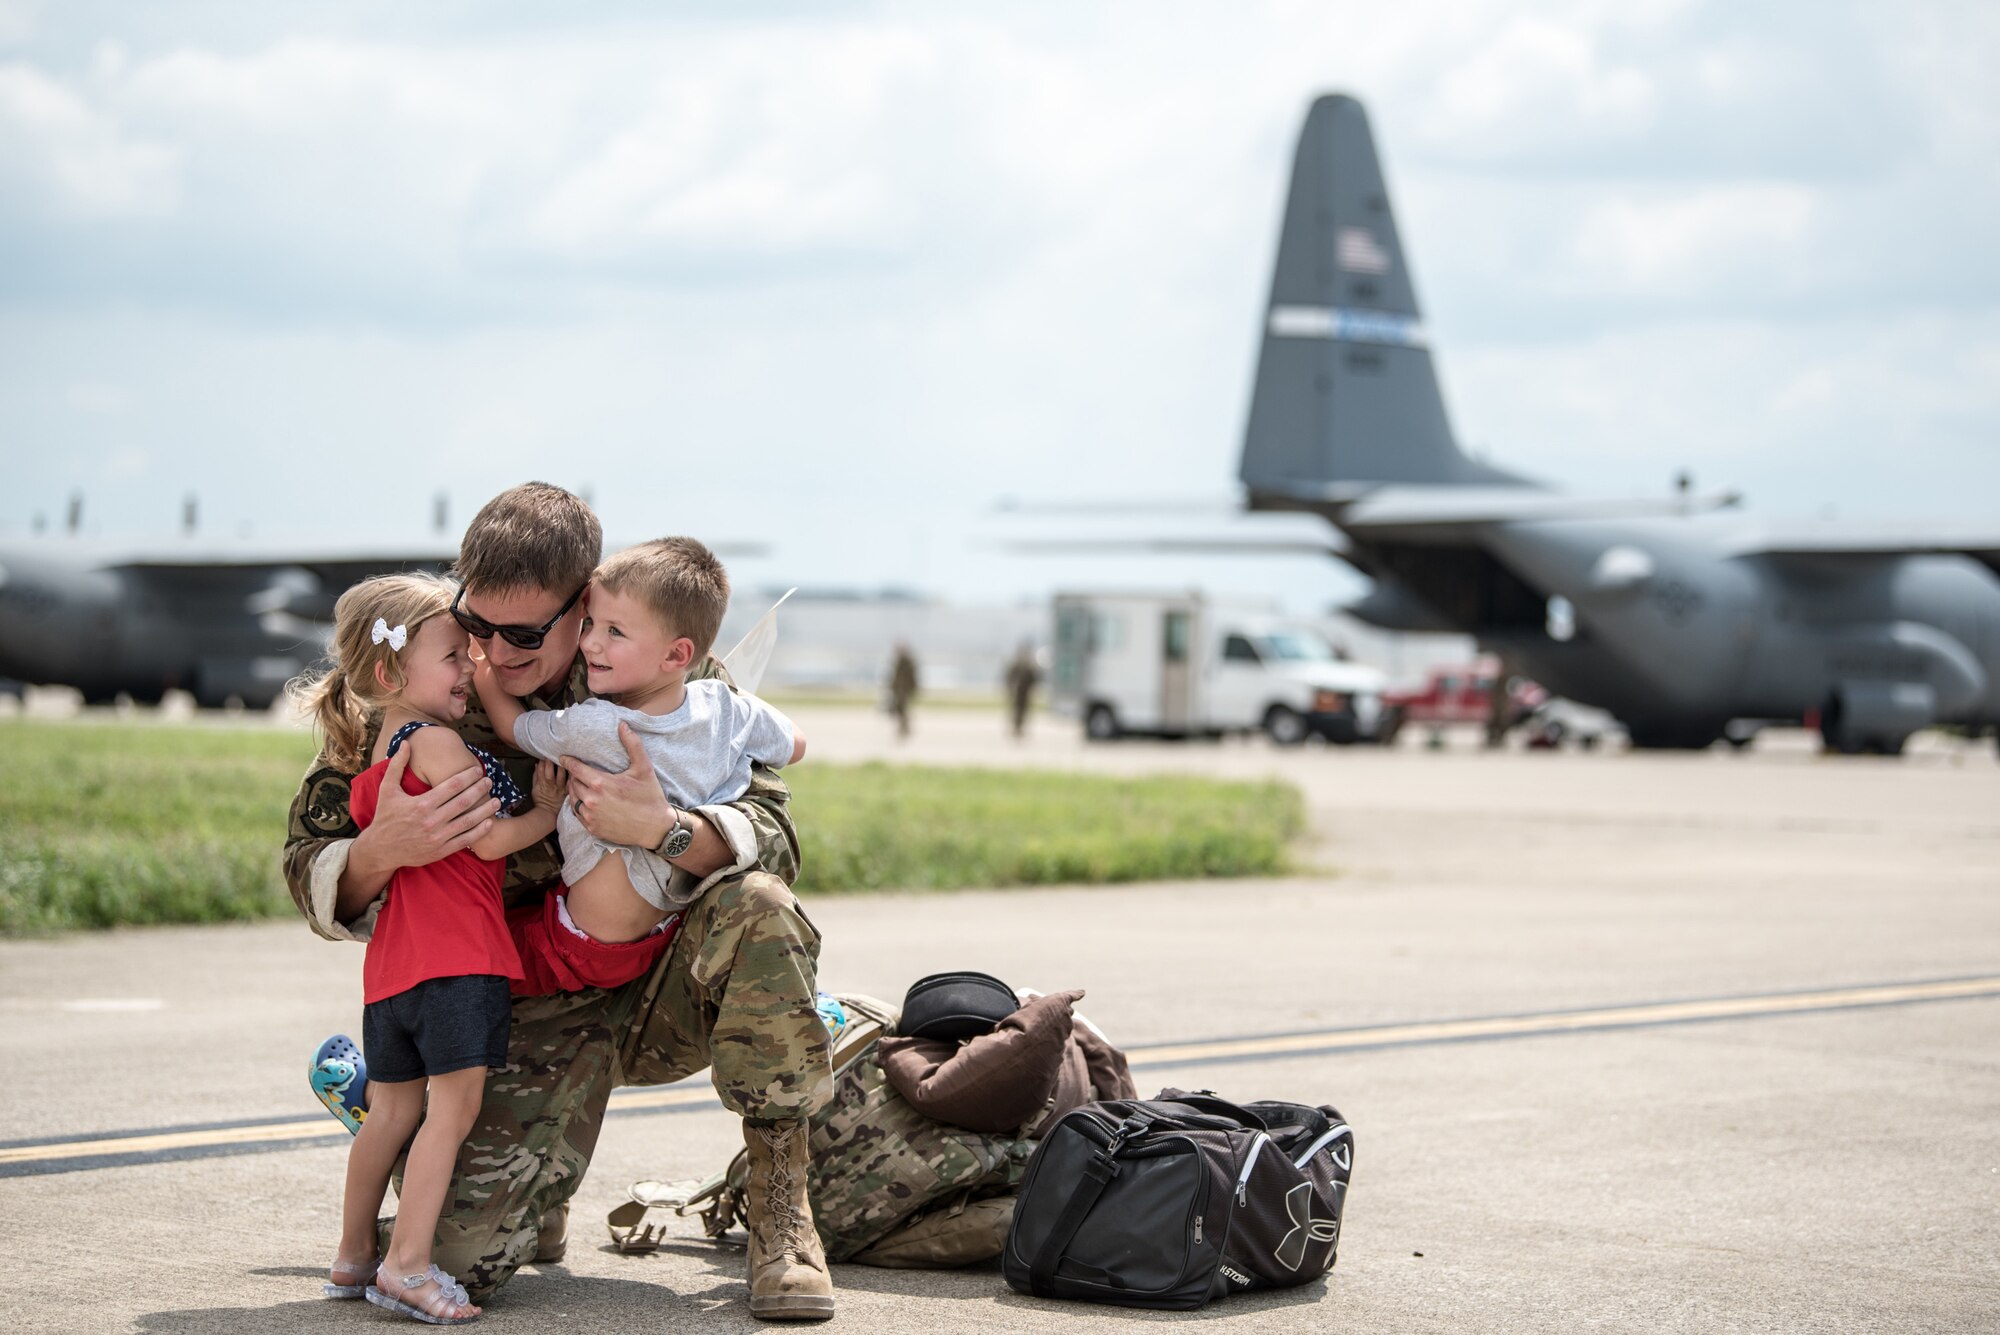 Master Sgt. Phil Speck, superintendent of the 123rd Airlift Wing Public Affairs Office, earned third place in the 2018 Air National Guard Military Photographer of the Year contest for a broad spectrum of work while deployed and at home station, including this photo of a deployment homecoming in Louisville, Ky., July 6, 2018. (U.S. Air National Guard photo by Master Sgt. Phil Speck)